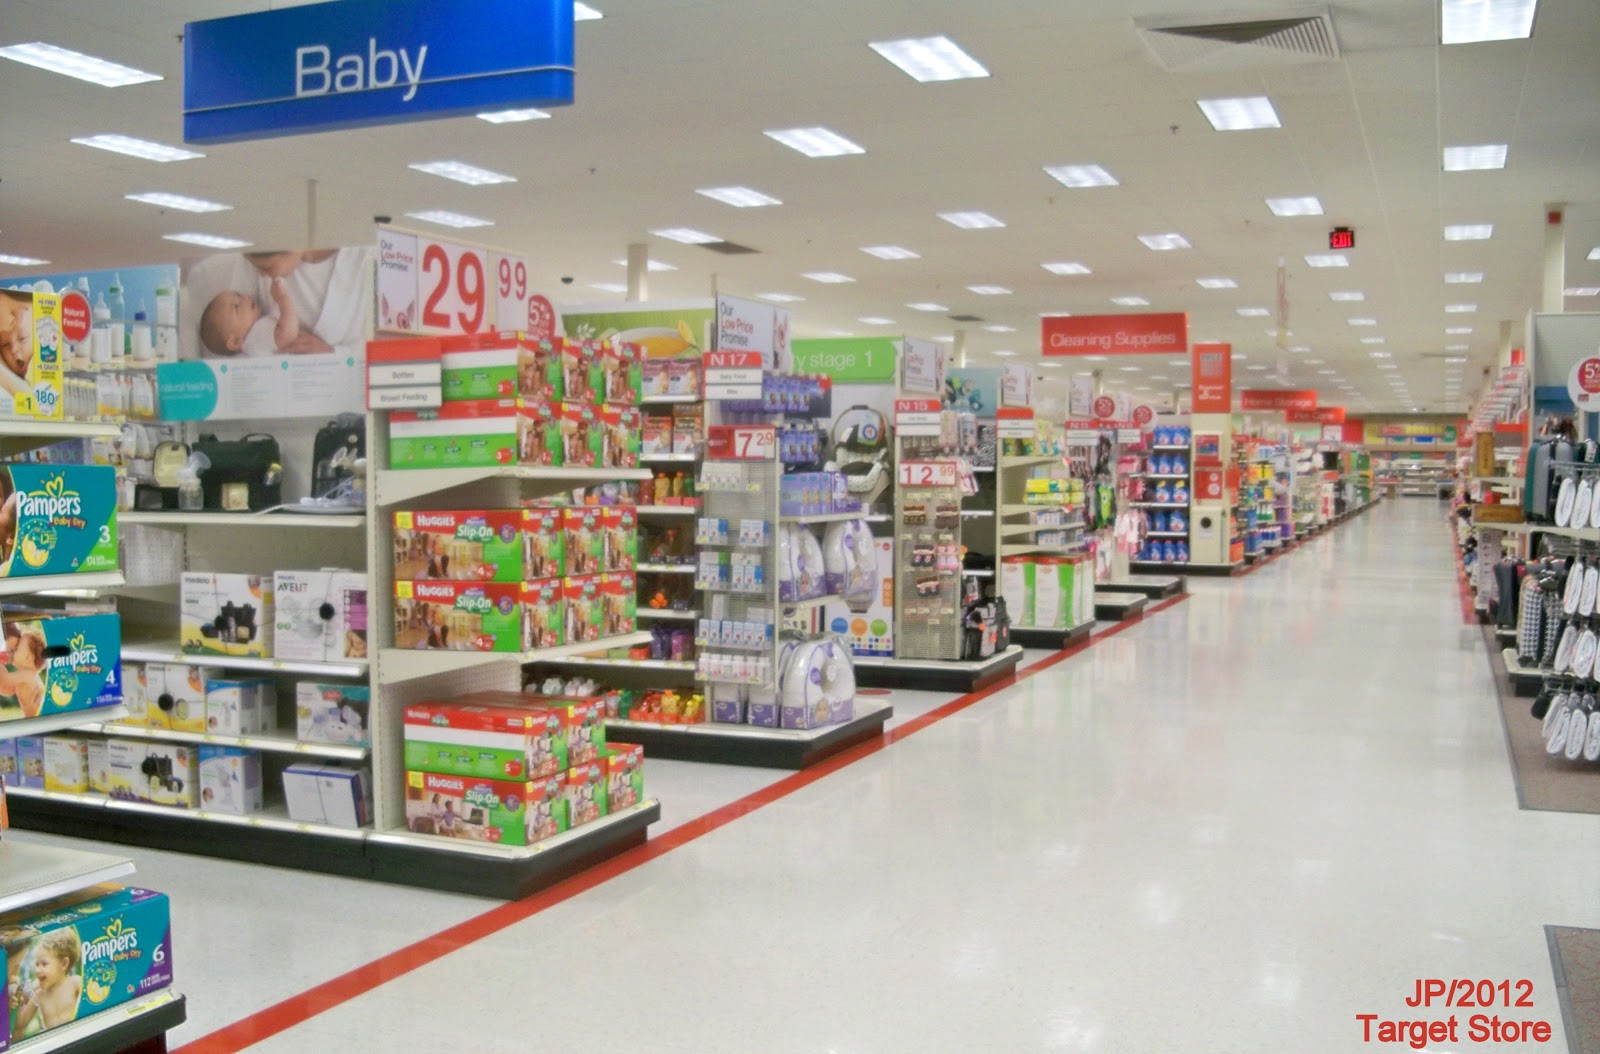 TARGET STORE Aisle, Target Retail Department Store Interior Picture